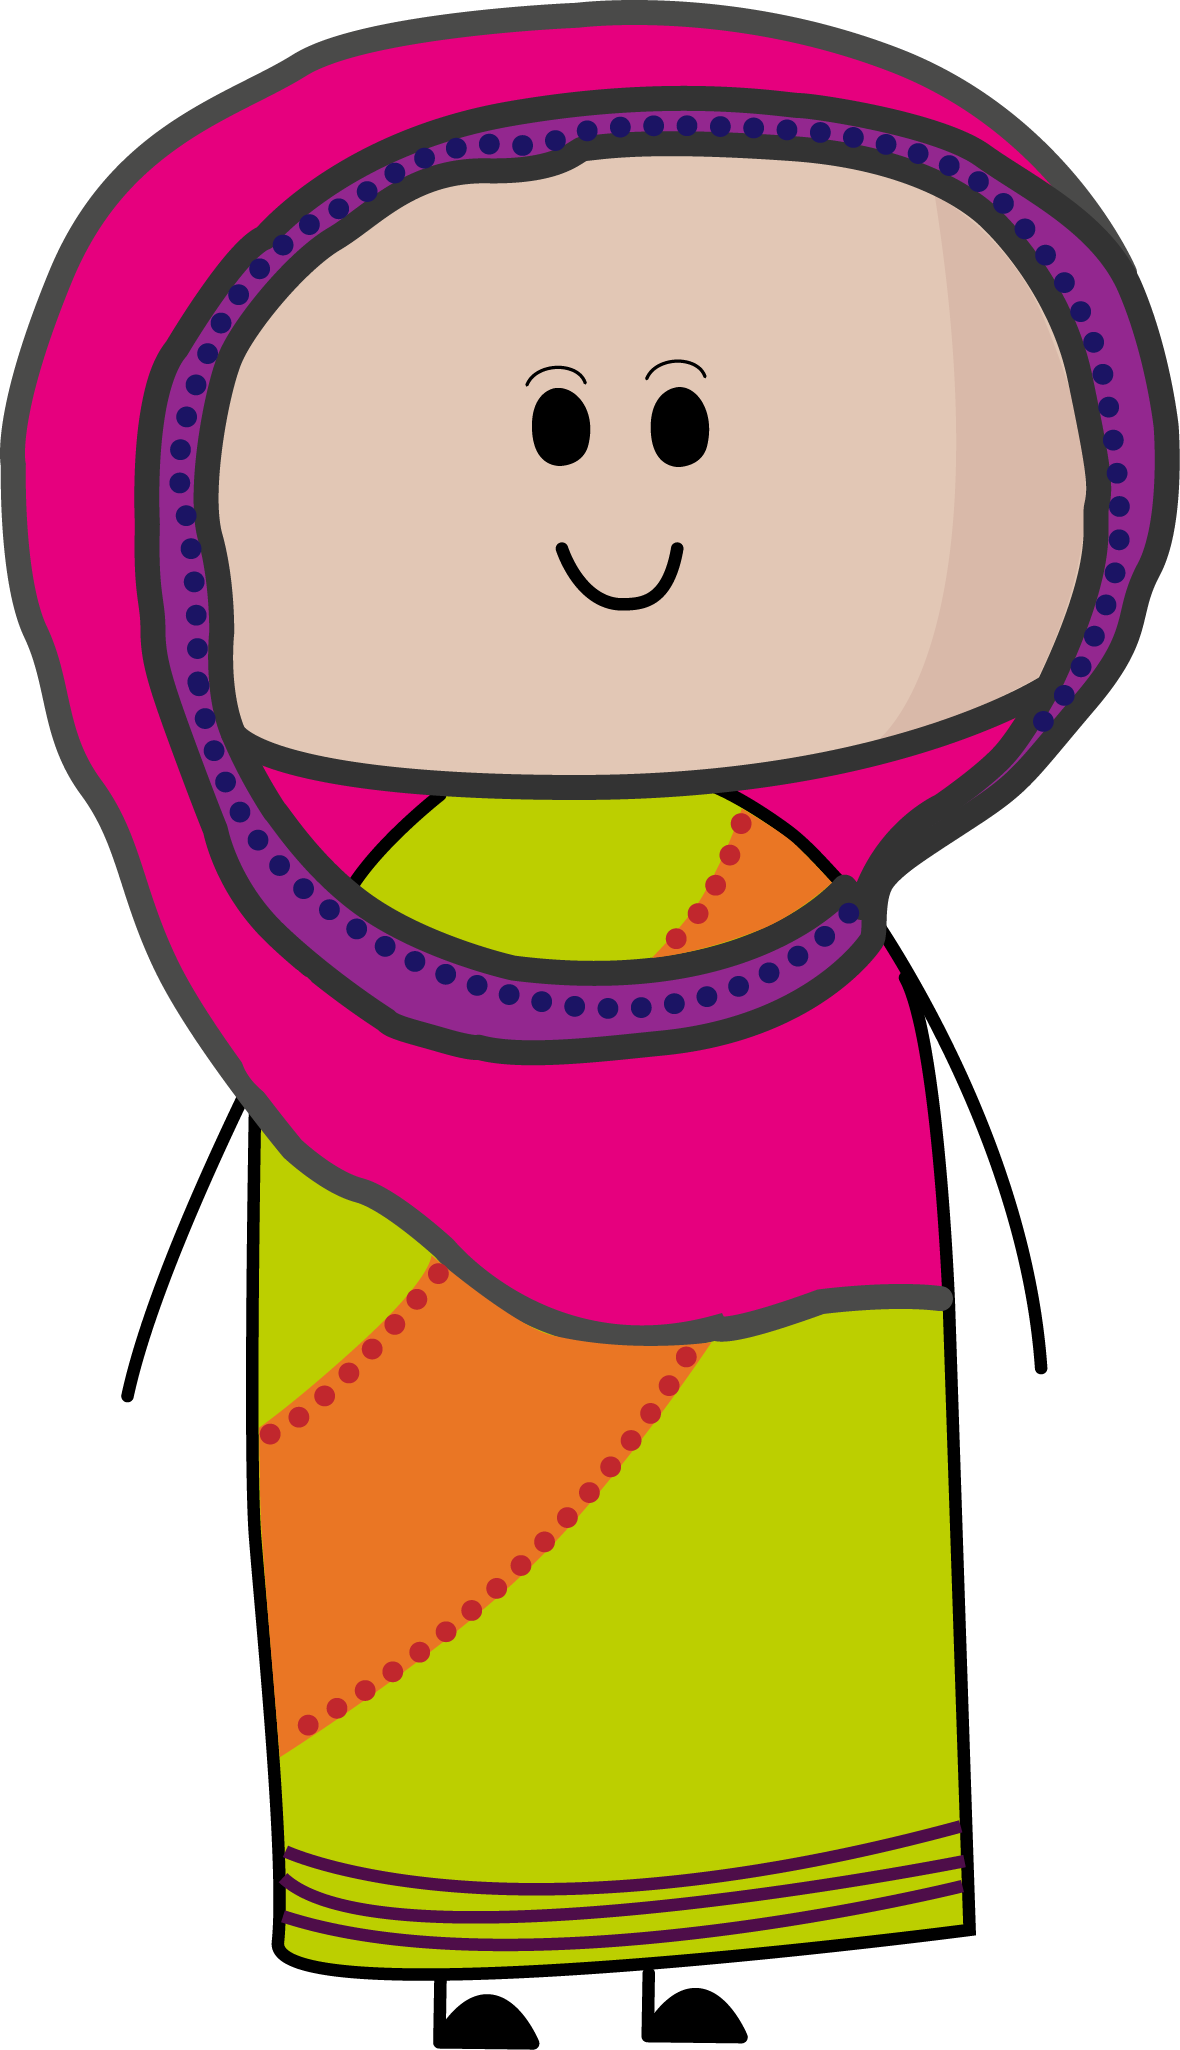 Cute Hindu Indian Clipart Character Vector Illustrated - Cute Hindu Indian Clipart Character Vector Illustrated (1180x2050)